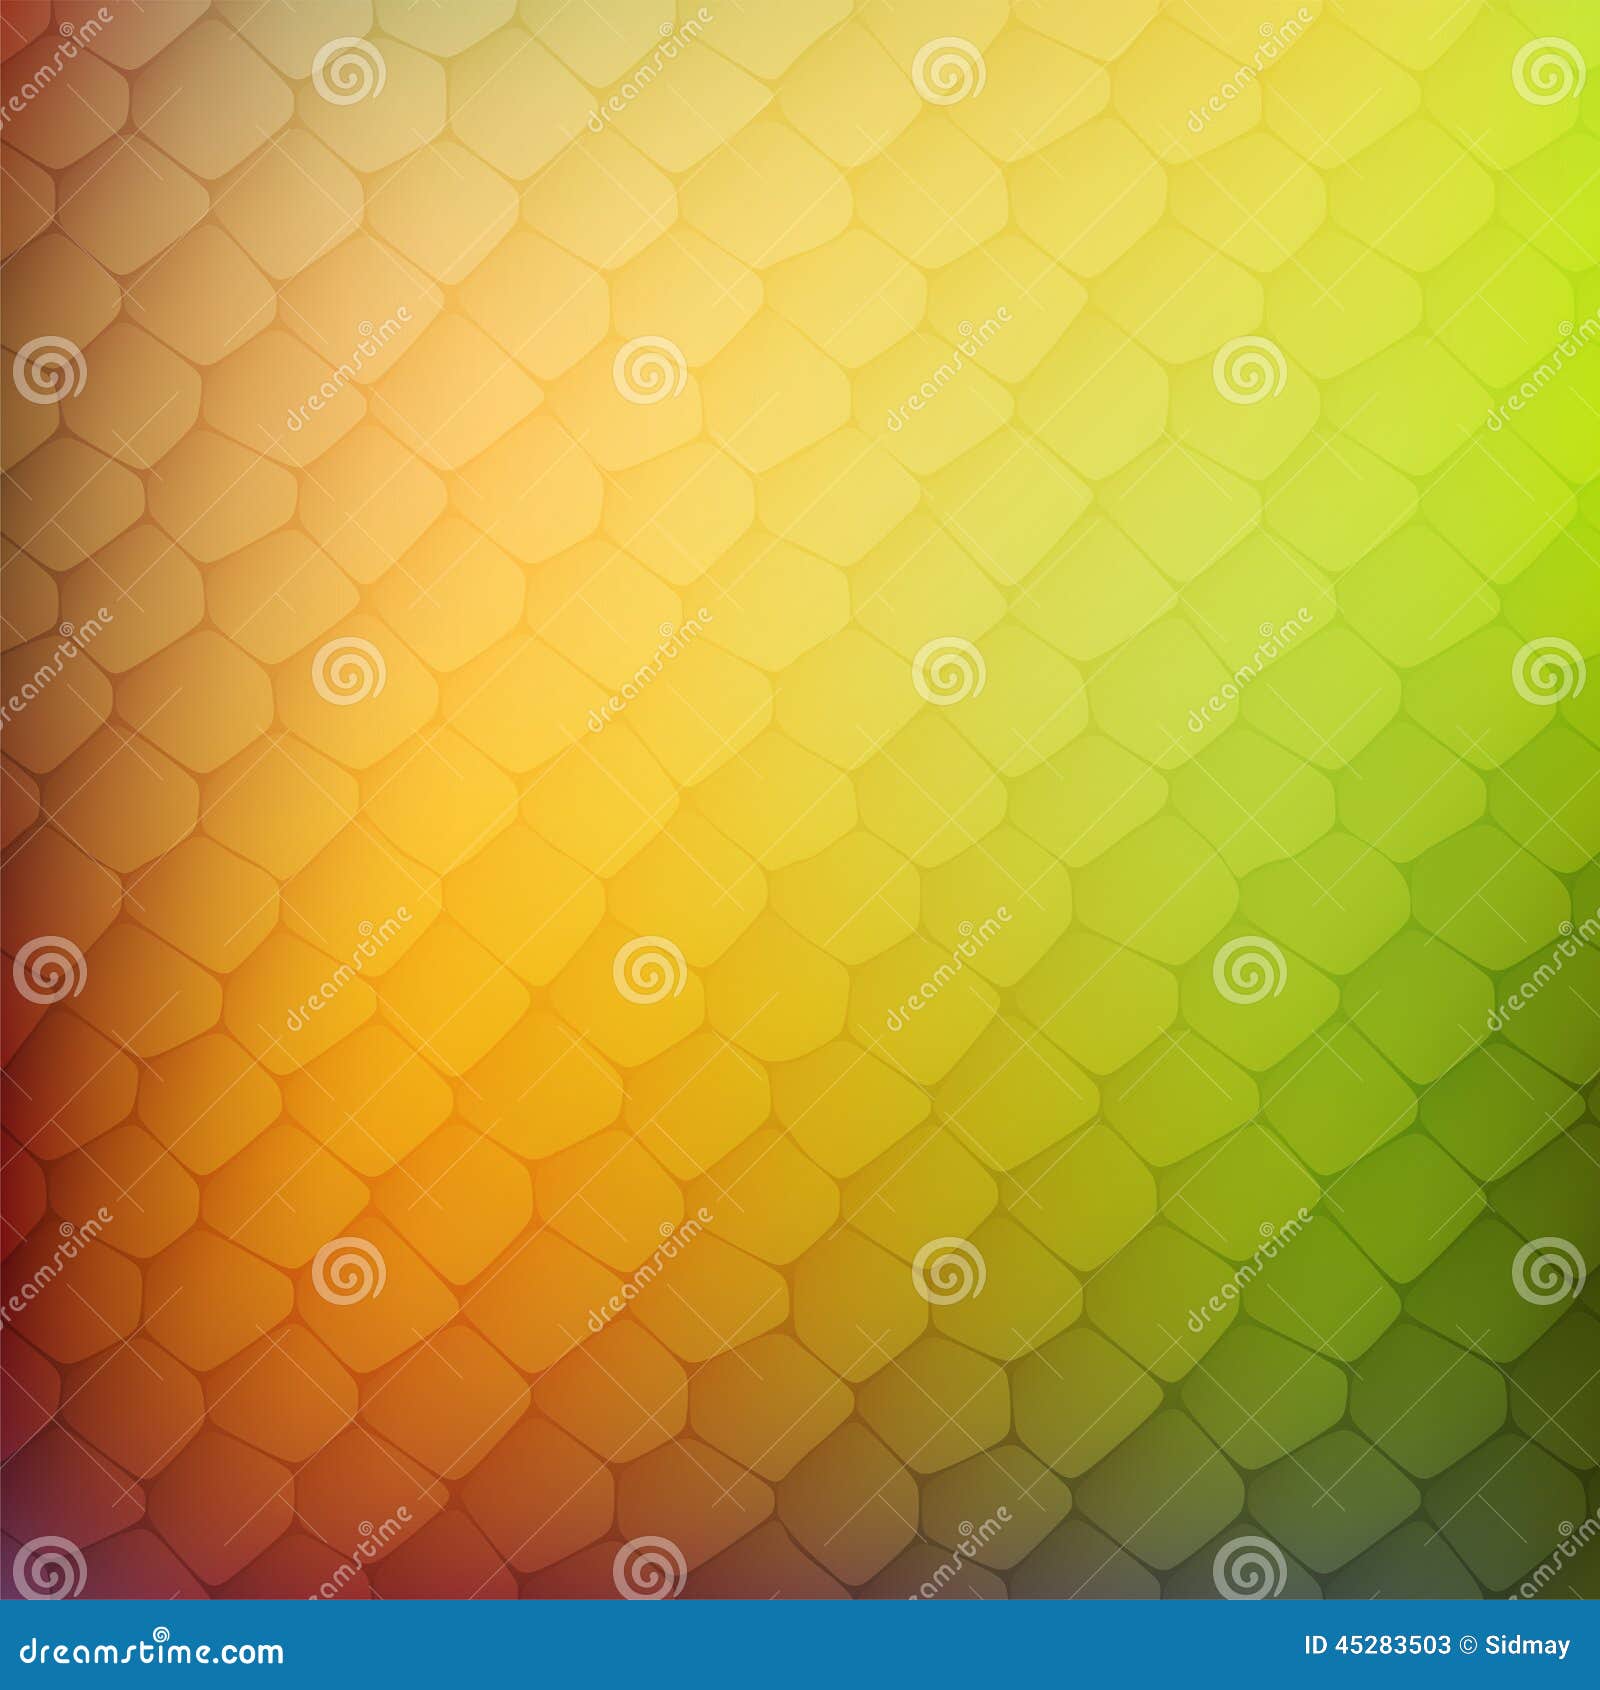 abstract background of colored cells